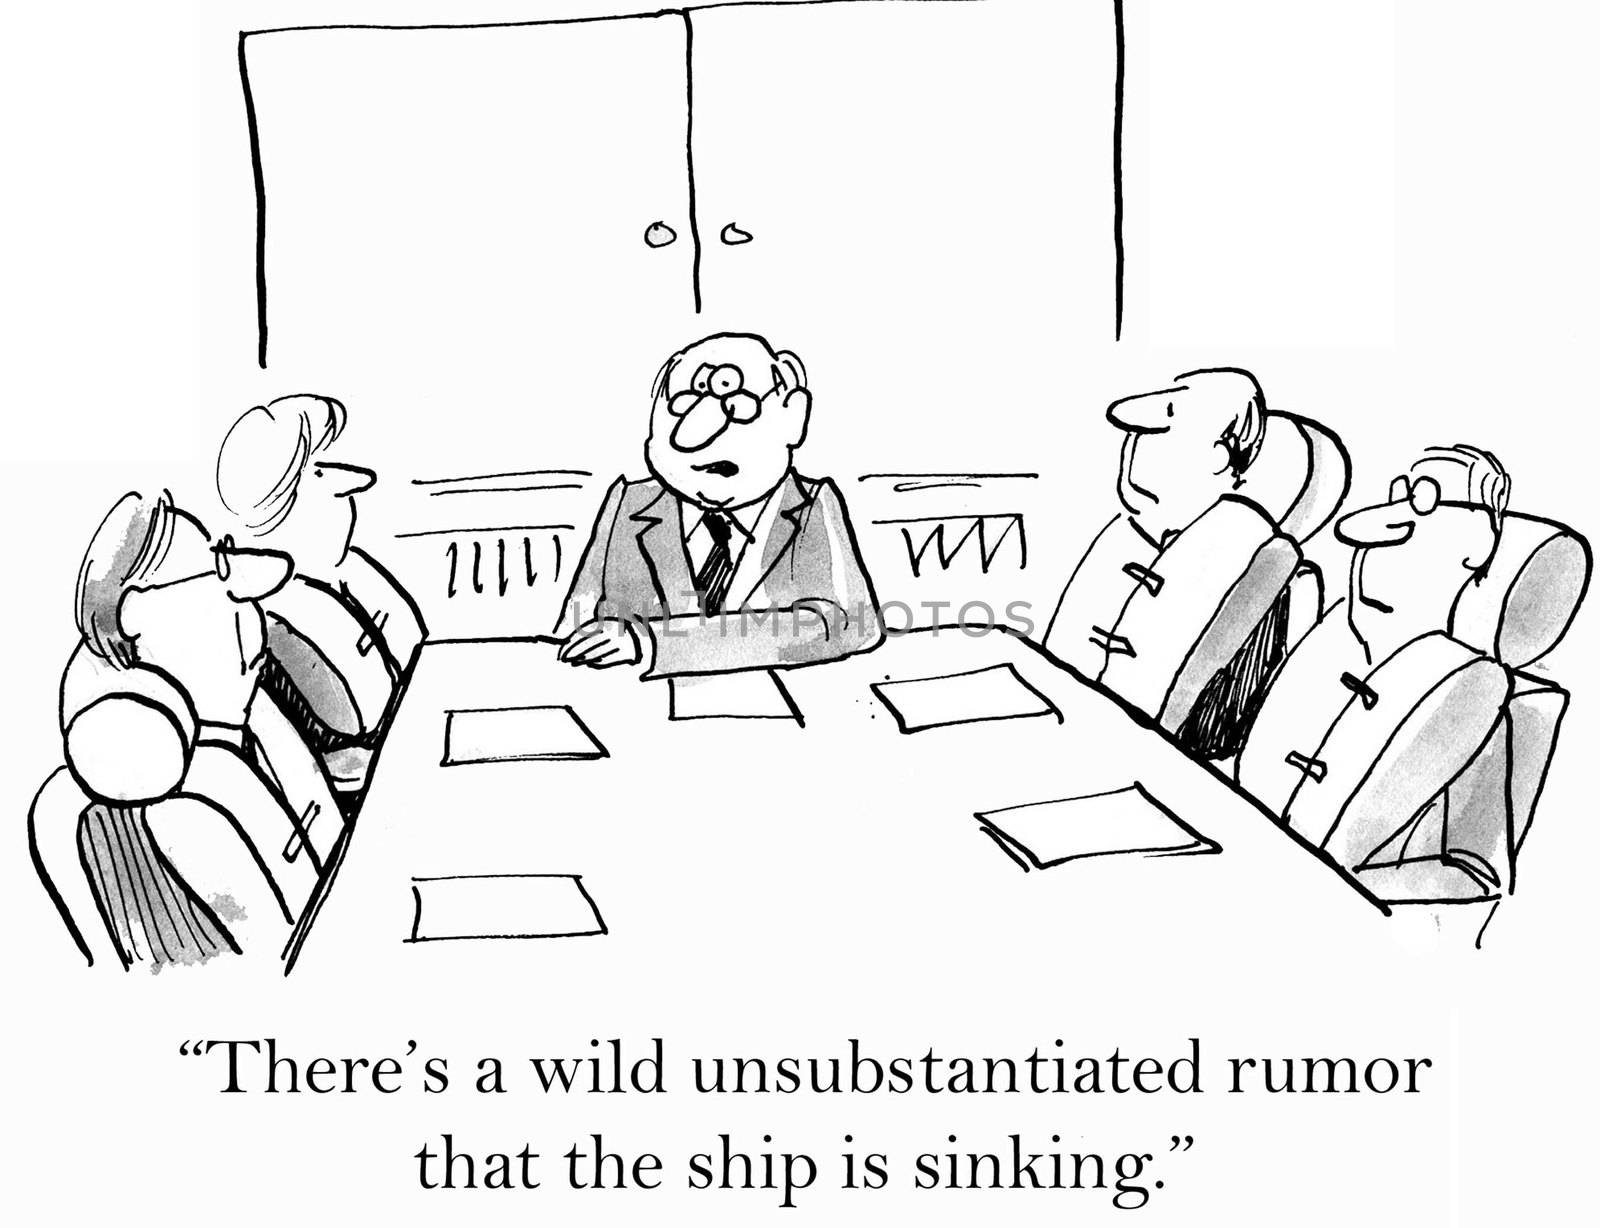 "There's a wild unsubstantiated rumor that the ship is sinking."